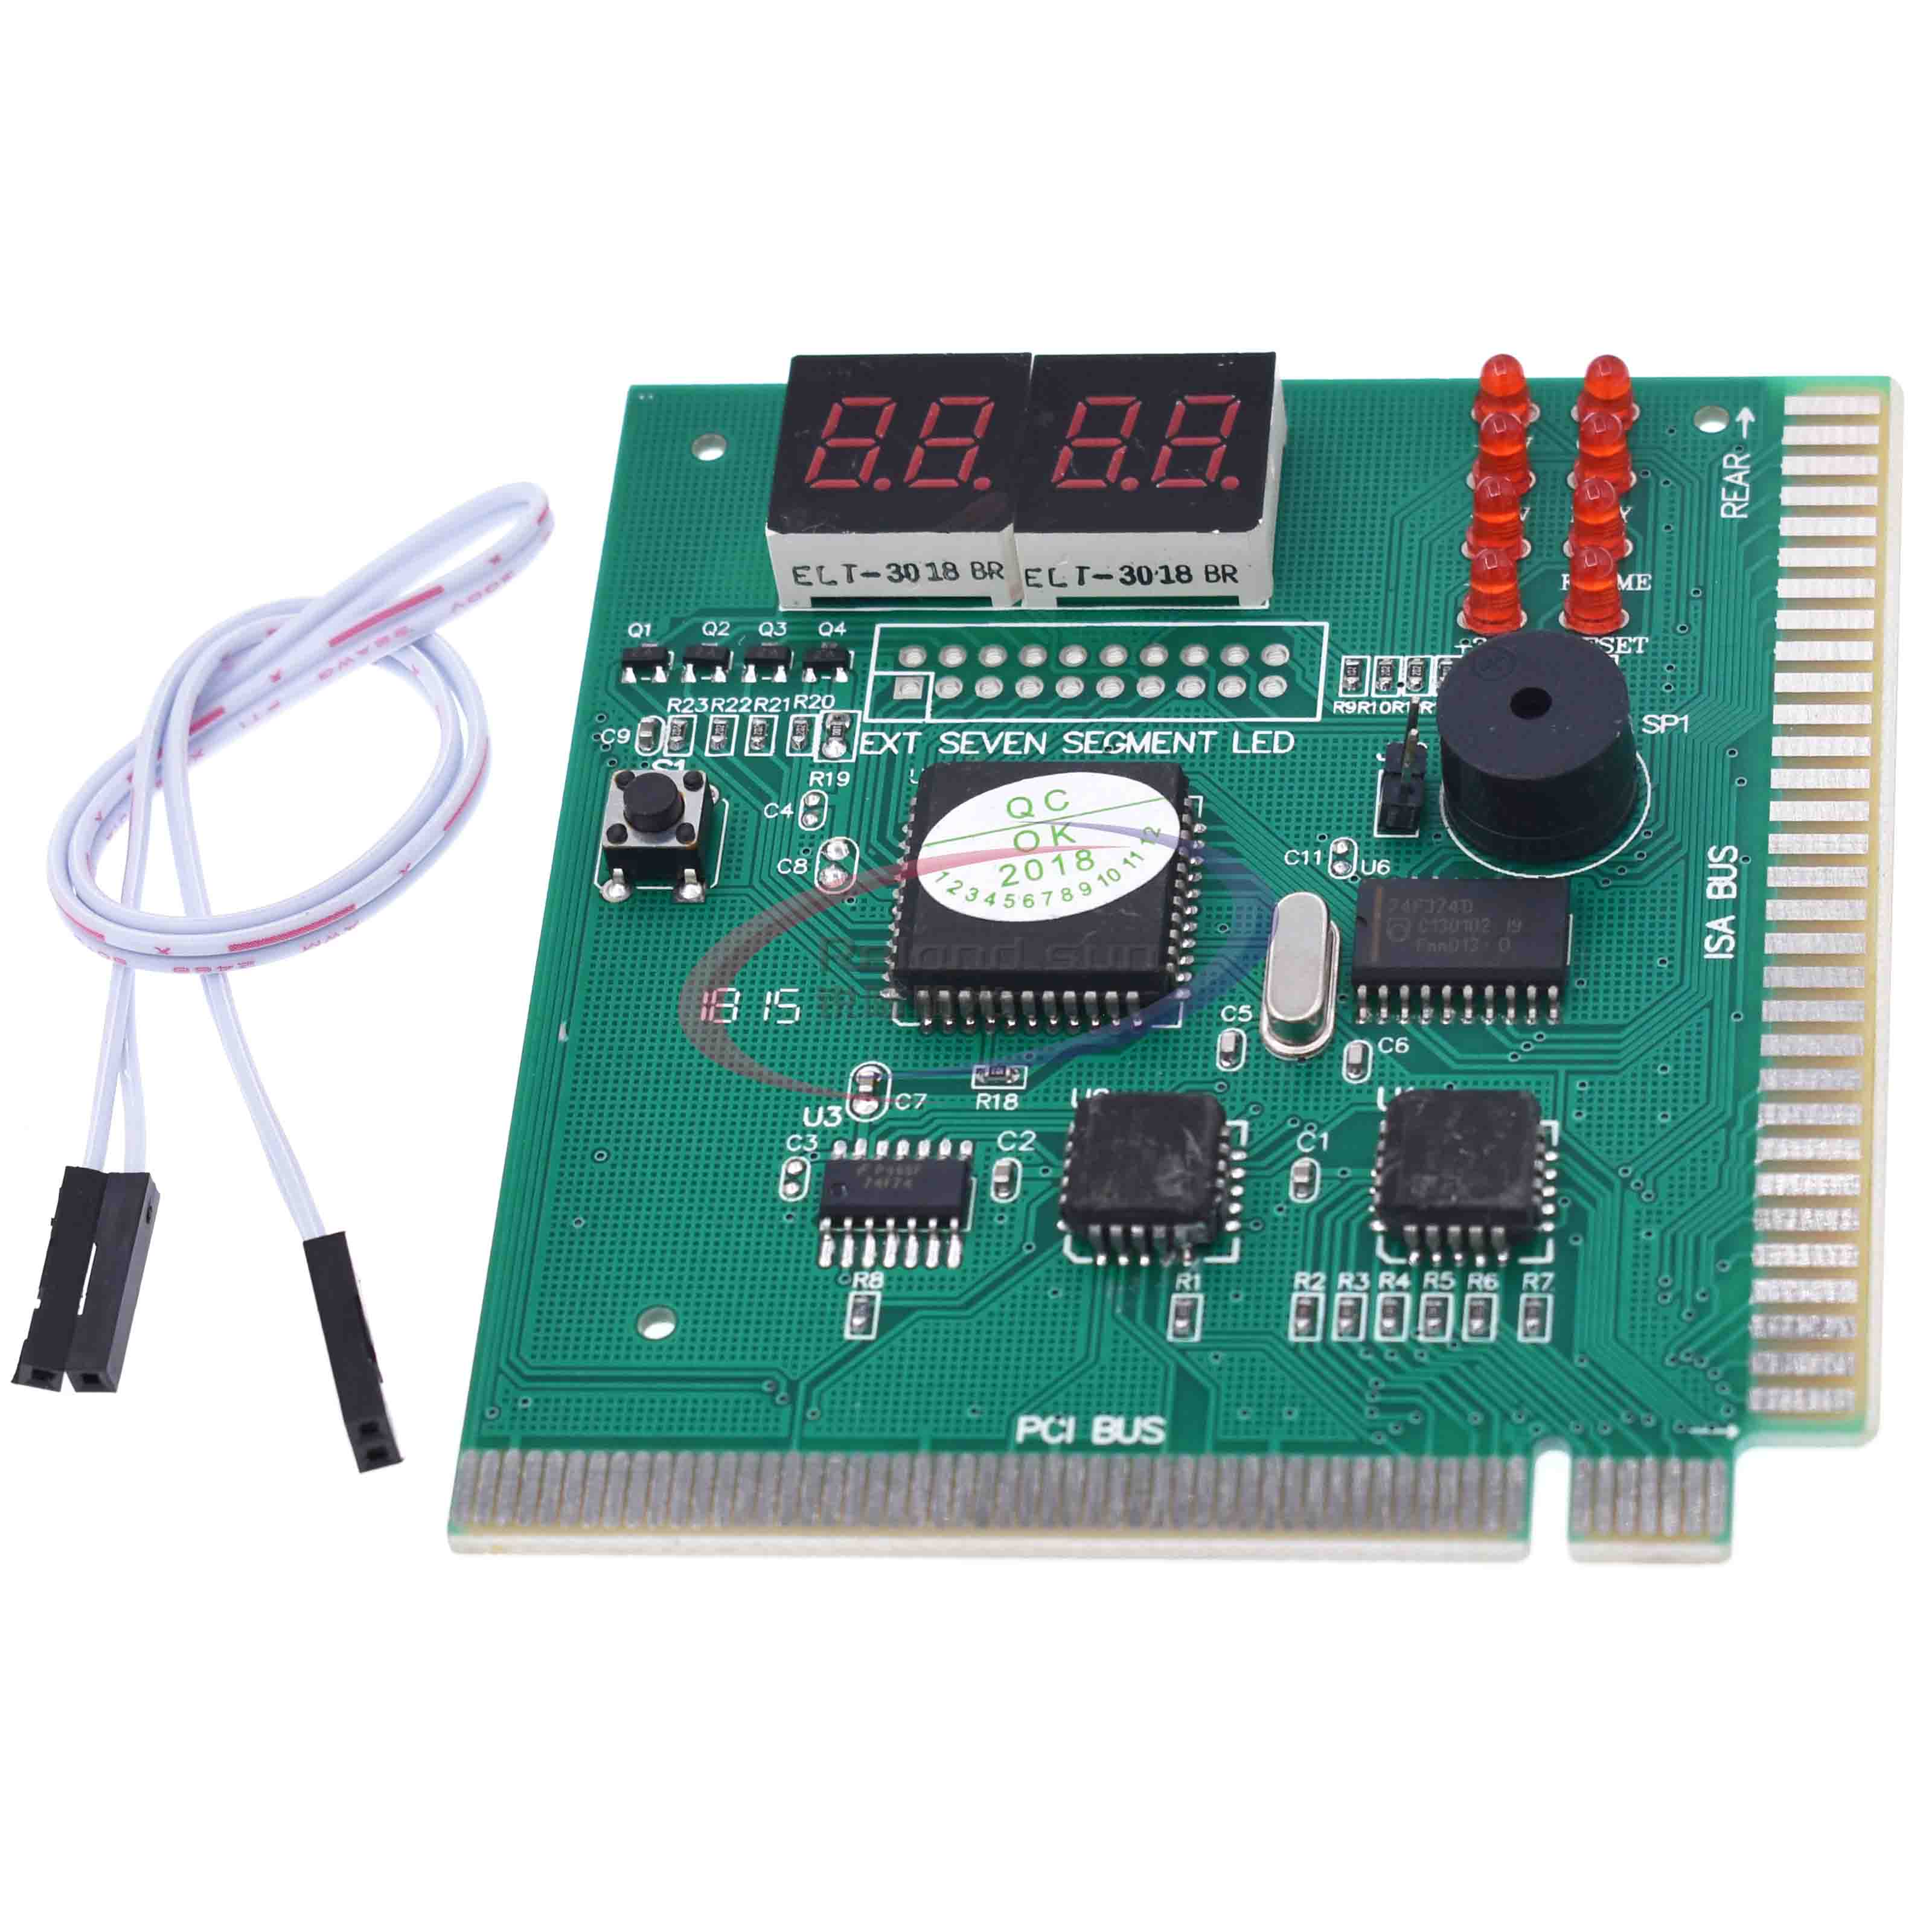 4 Digit LCD Display PC Analyzer Diagnostic Card Motherboard Post Tester Computer Analysis PCI Card Networking Tools